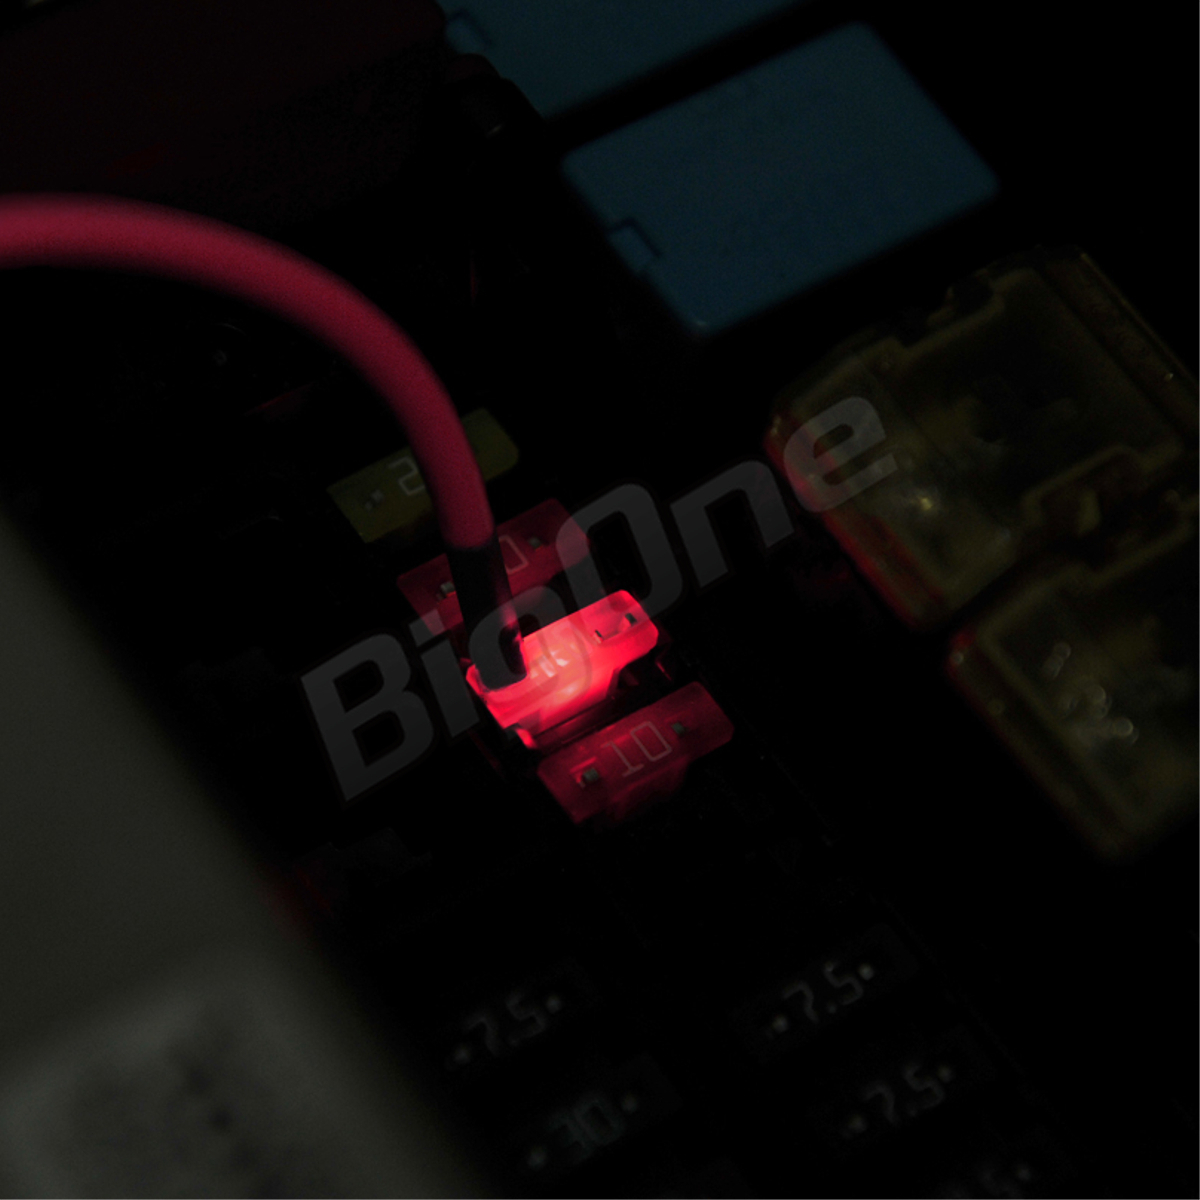 BigOne torn .. light ...... indicator built-in standard flat type fuse power supply 30A ATP LED chigar lighter ETC drive recorder. connection 